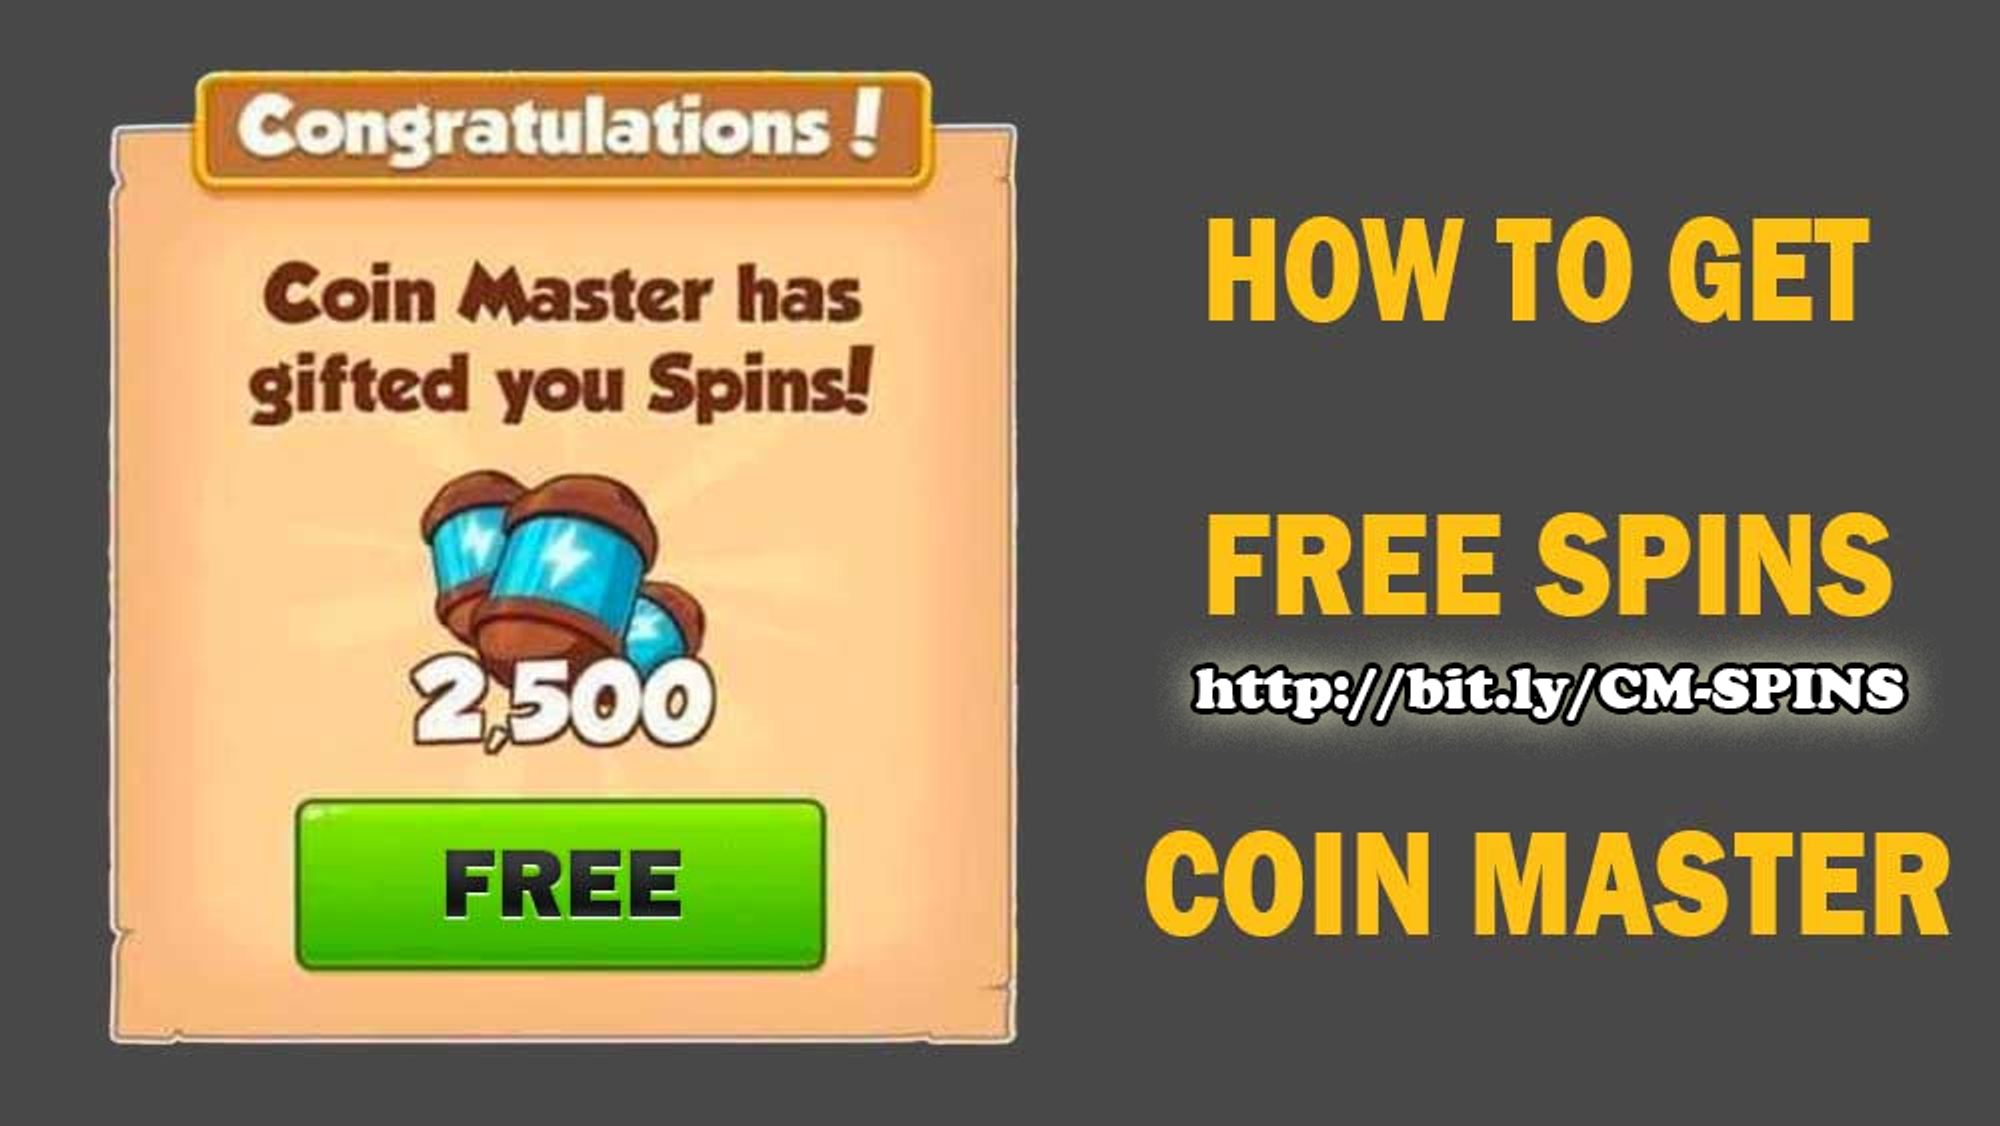 coin master free spins link generator